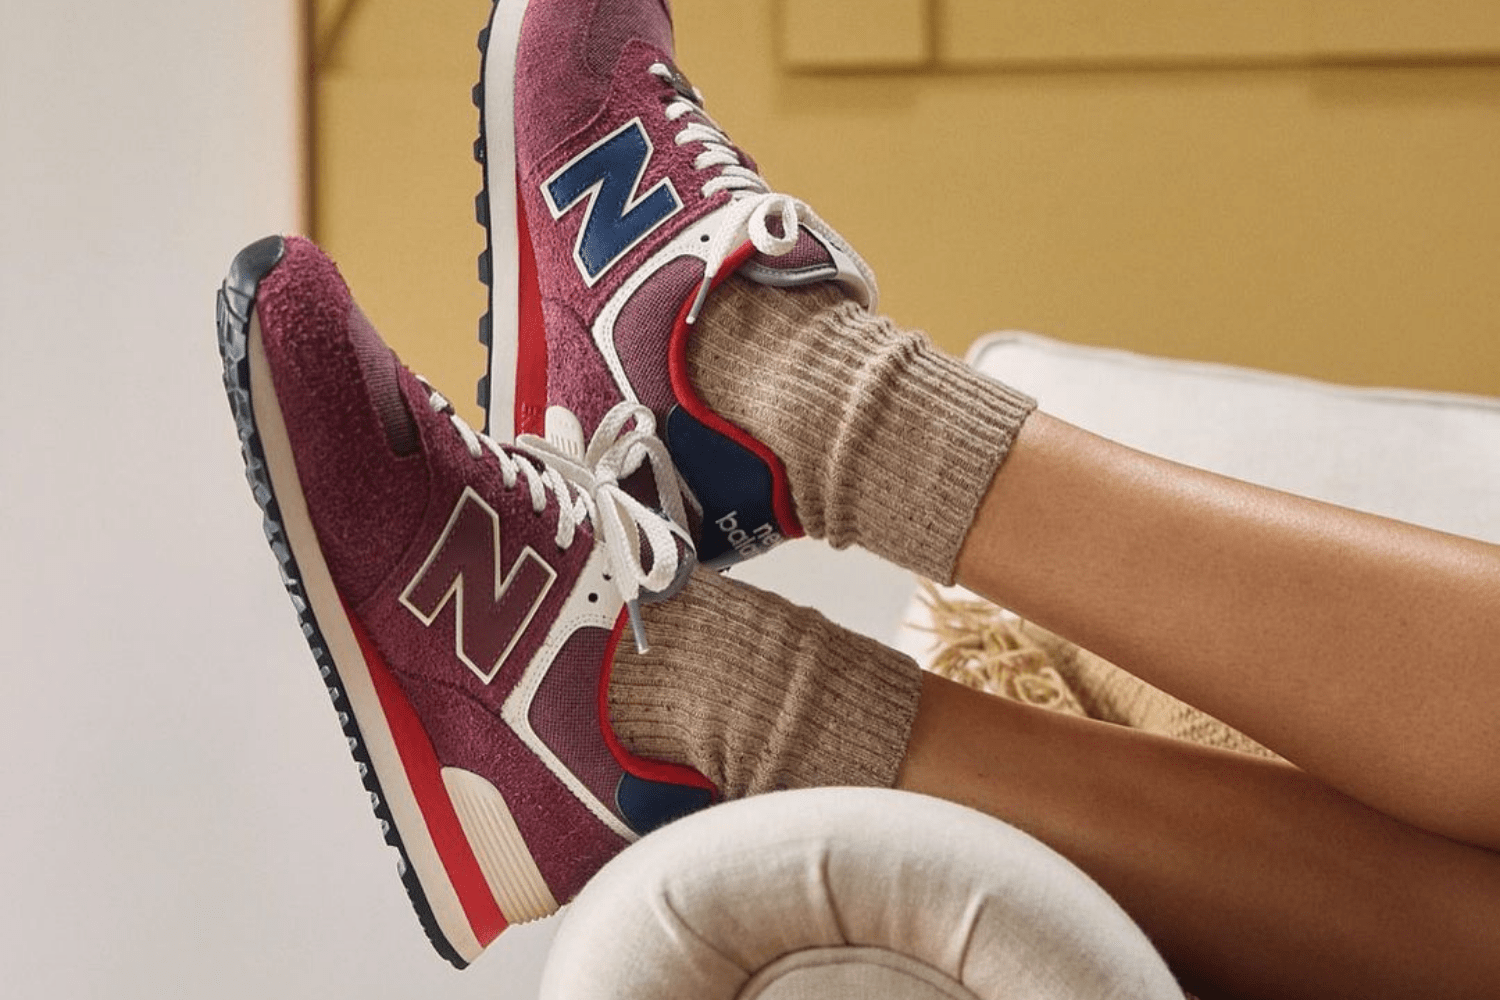 A true classic: this is the New Balance 574